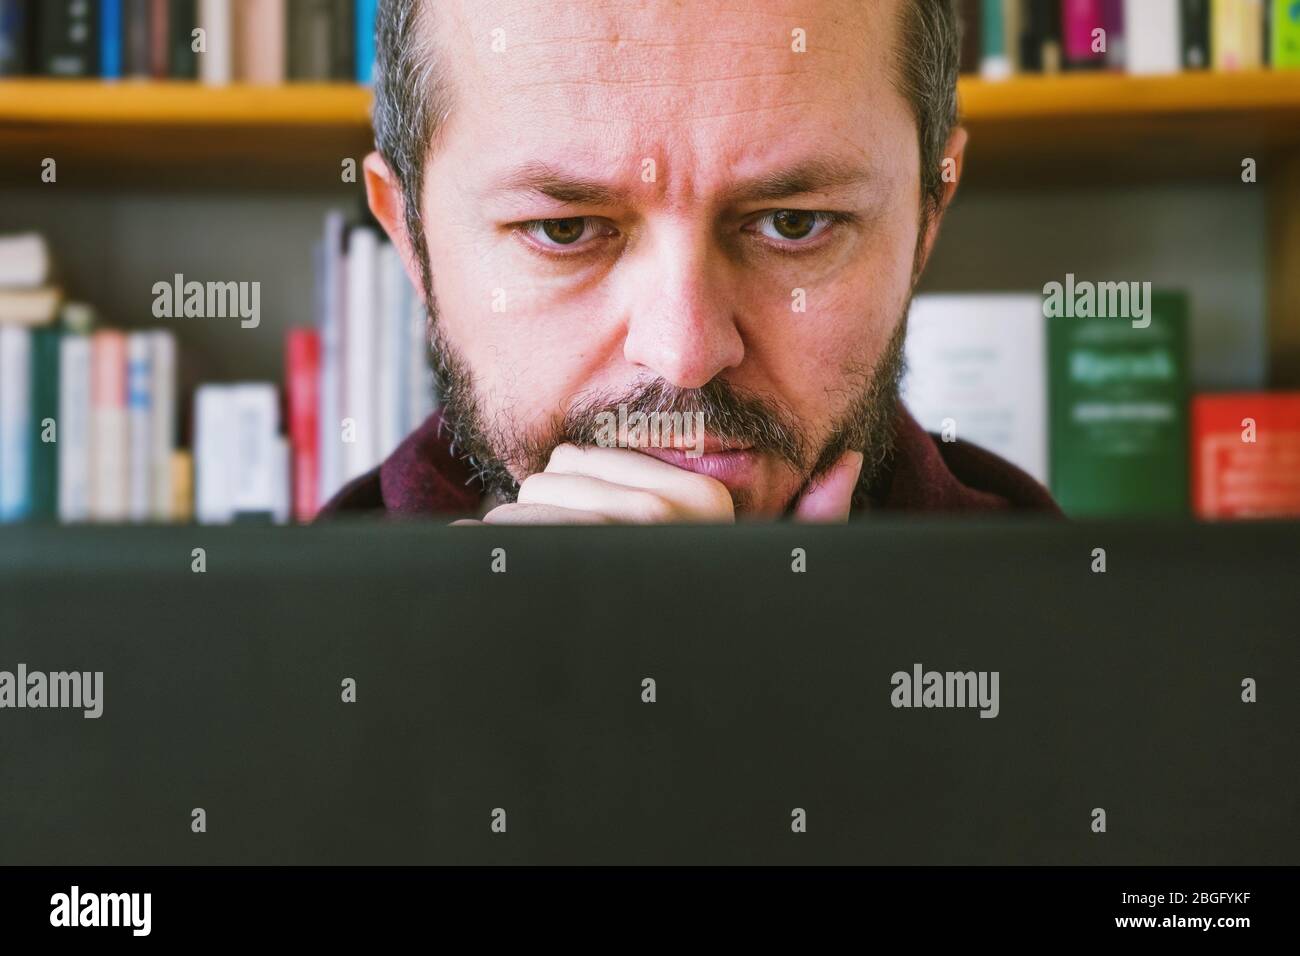 Adult man working from home office. Bearded man dedicated working online from home on computer laptop, book shelves behind him. Close up. Stock Photo